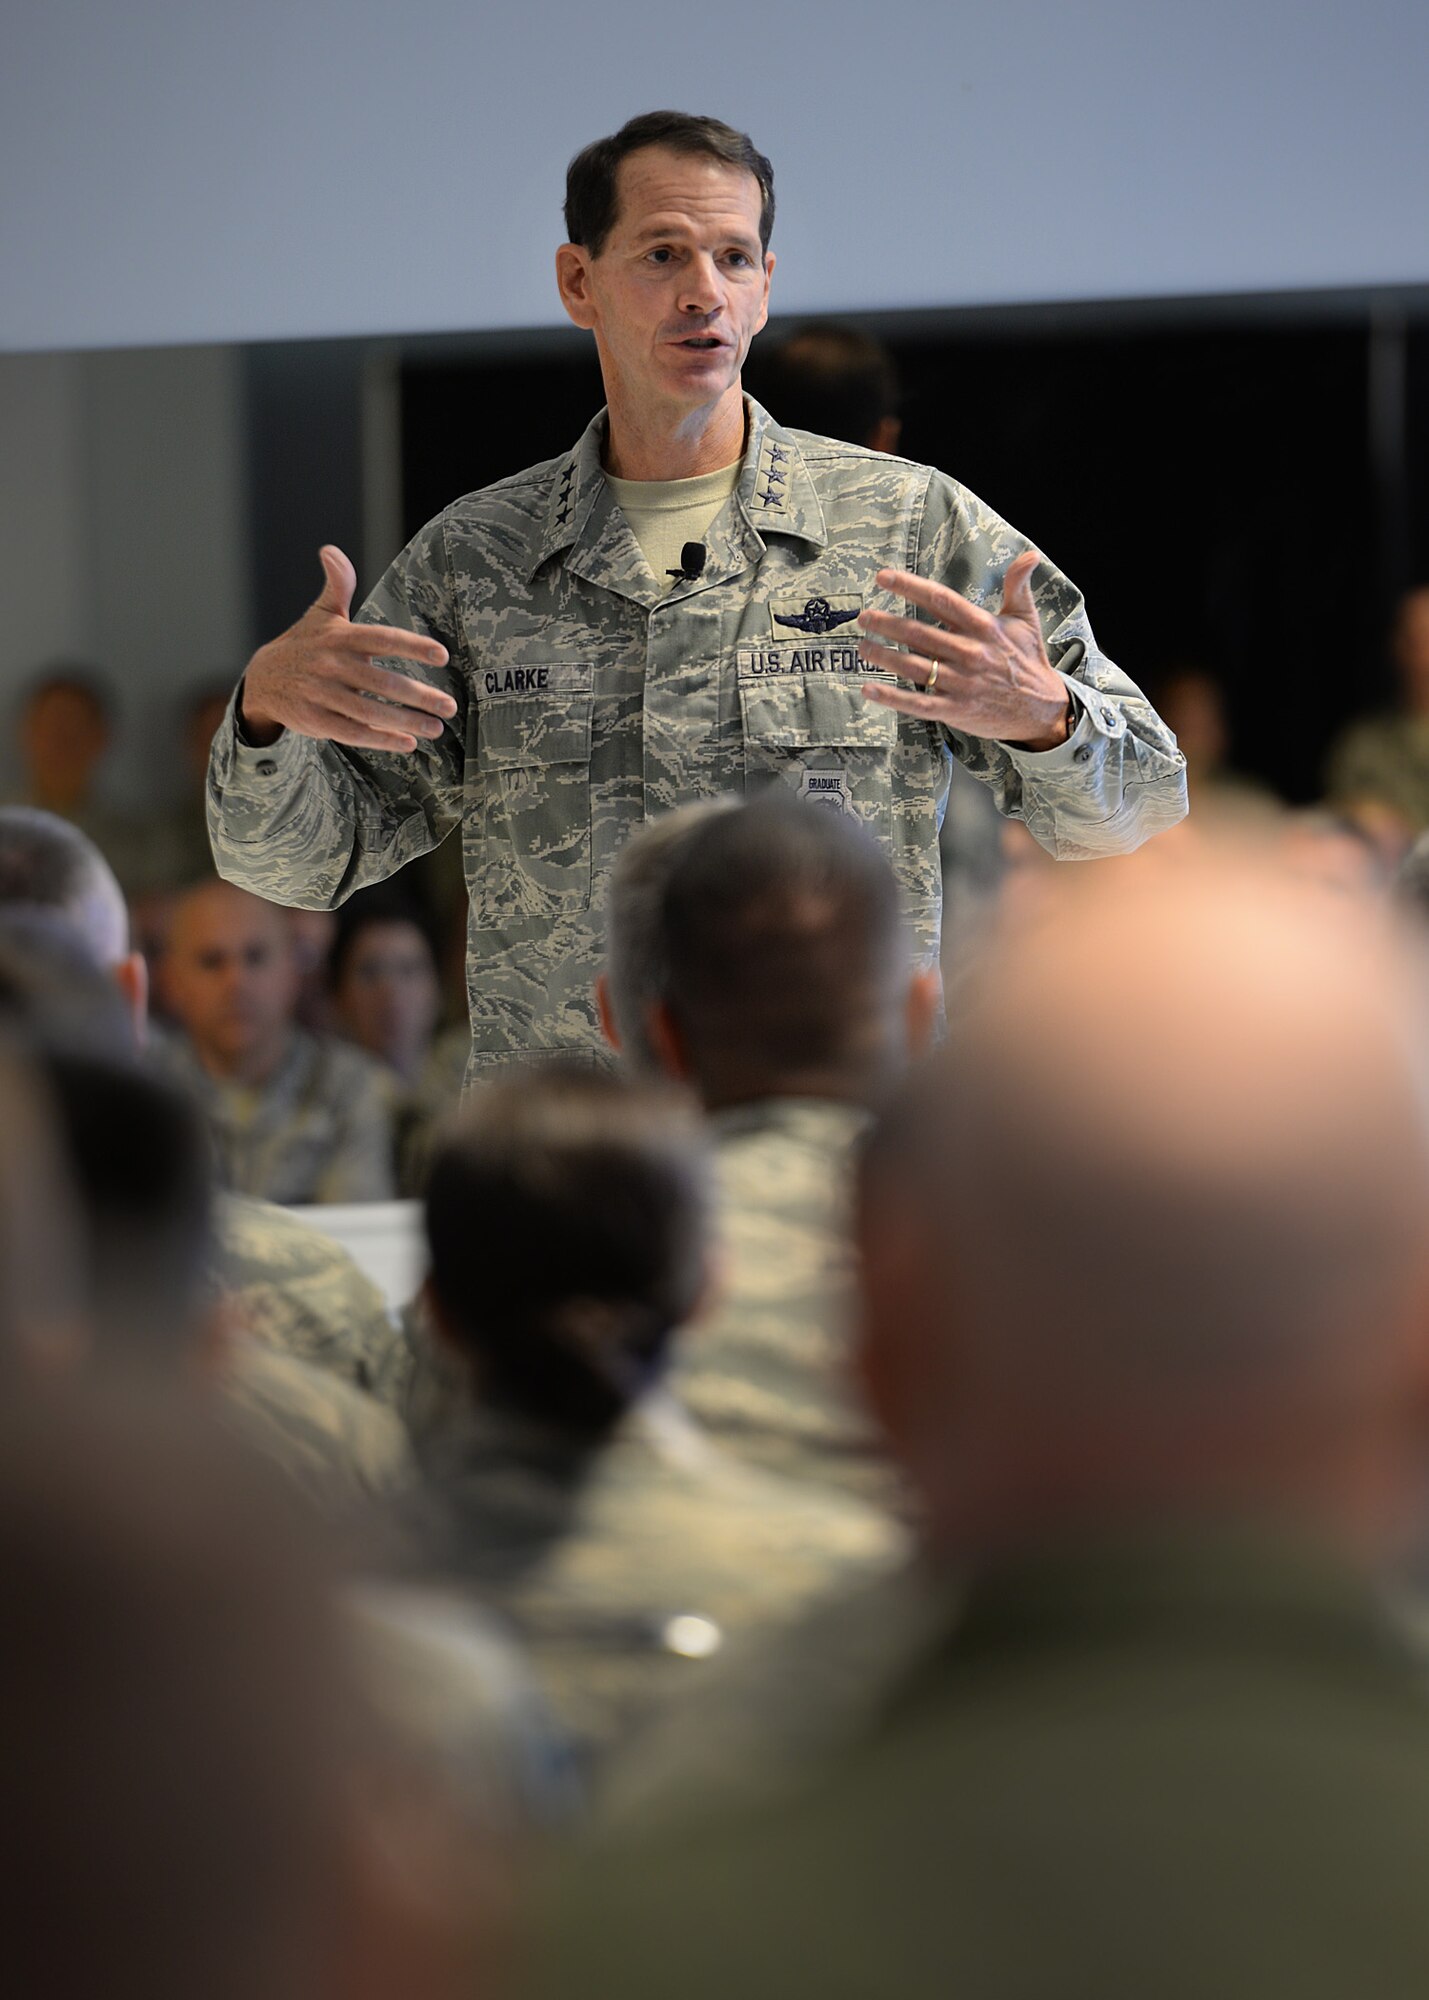 The director of the Air National Guard, Lt. Gen. Stanley E. “Sid” Clarke III, speaks with members of the 157th Air Refueling Wing during an all-call at Pease Air National Guard Base, New Hampshire, Oct. 15. During the all-call, Clarke expressed his confidence in the Airmen of the wing, discussed ANG manning, the future of Total Force Integration and answered questions during a Q&A session with Airmen. (U.S. Air National Guard photo by Senior Airman Kayla McWalter)